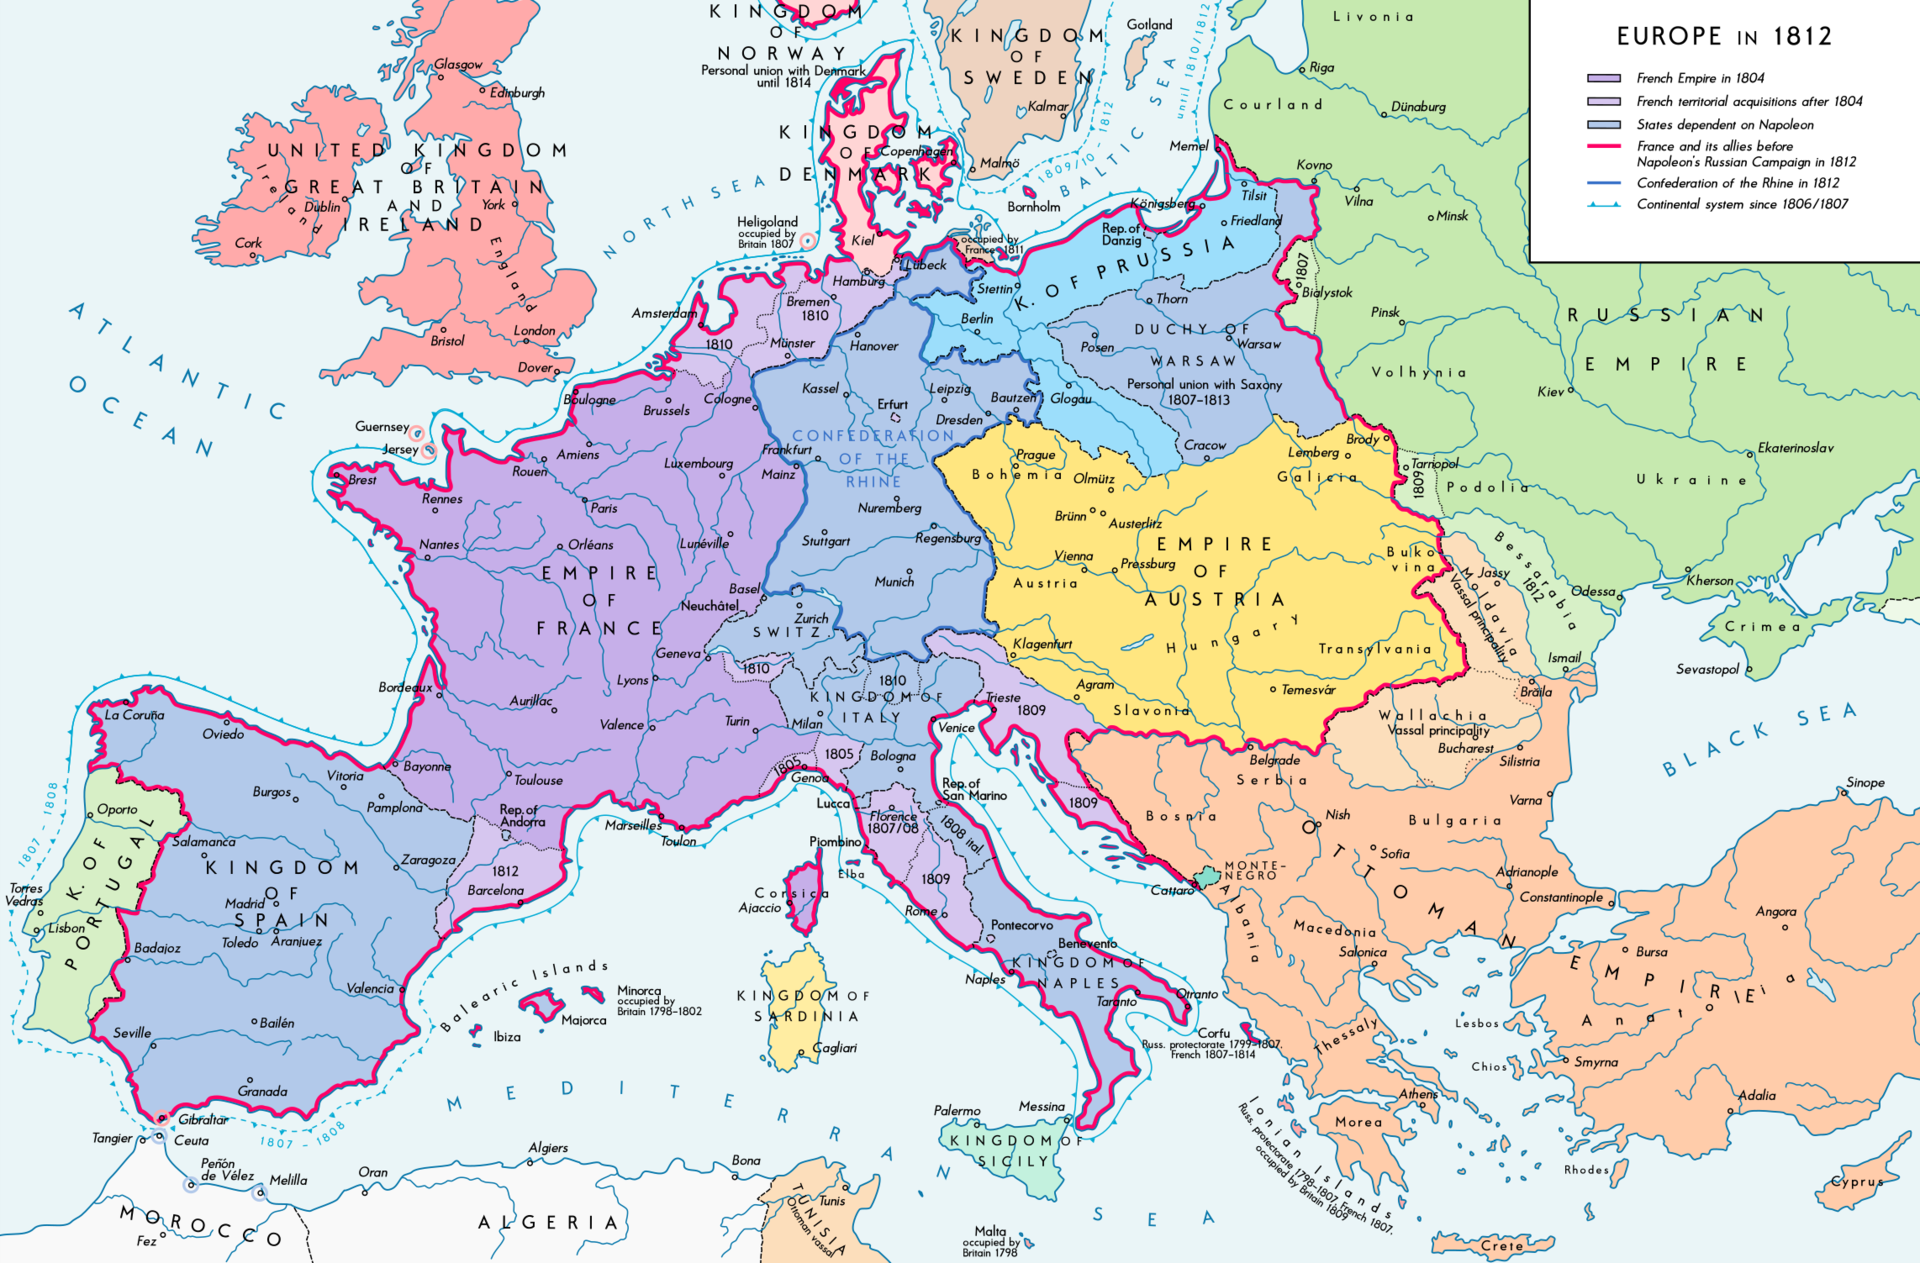 The French Empire in Europe in 1812, near its peak extent